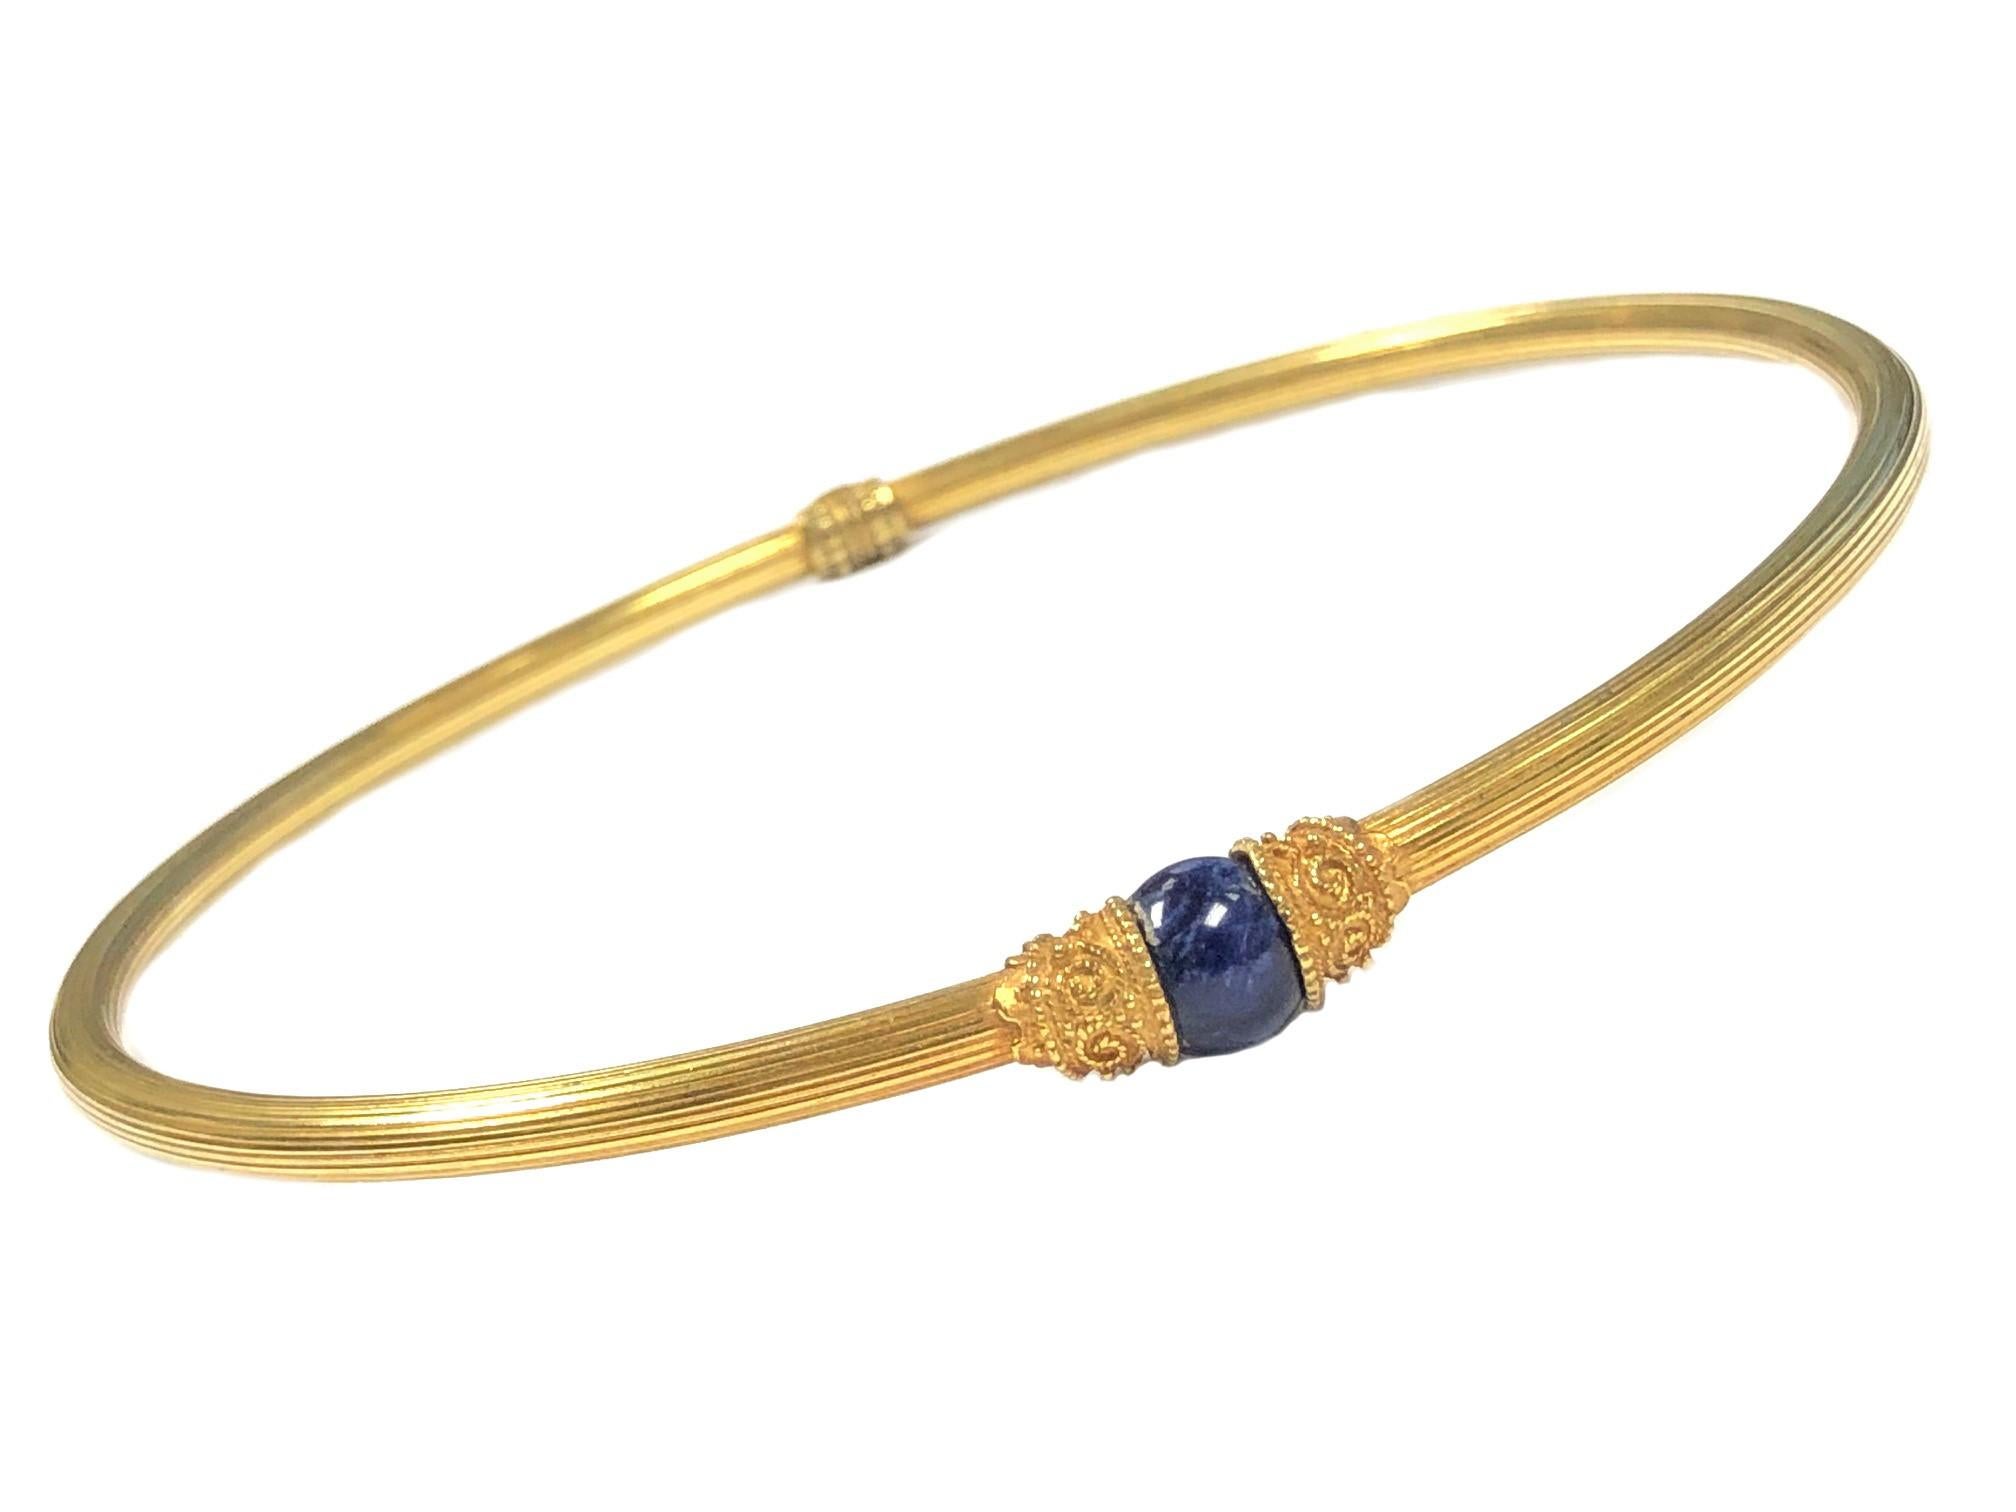 Circa 2000 Ilias Lalaounis Greece 18K Yellow Gold Collar Necklace. Having a light ribbed design and measuring 4.5 MM thick  (3/16 inch)  also having fine granulation gold work on the hinge and on either side of the 10MM Lapis Lazuli Round bead.